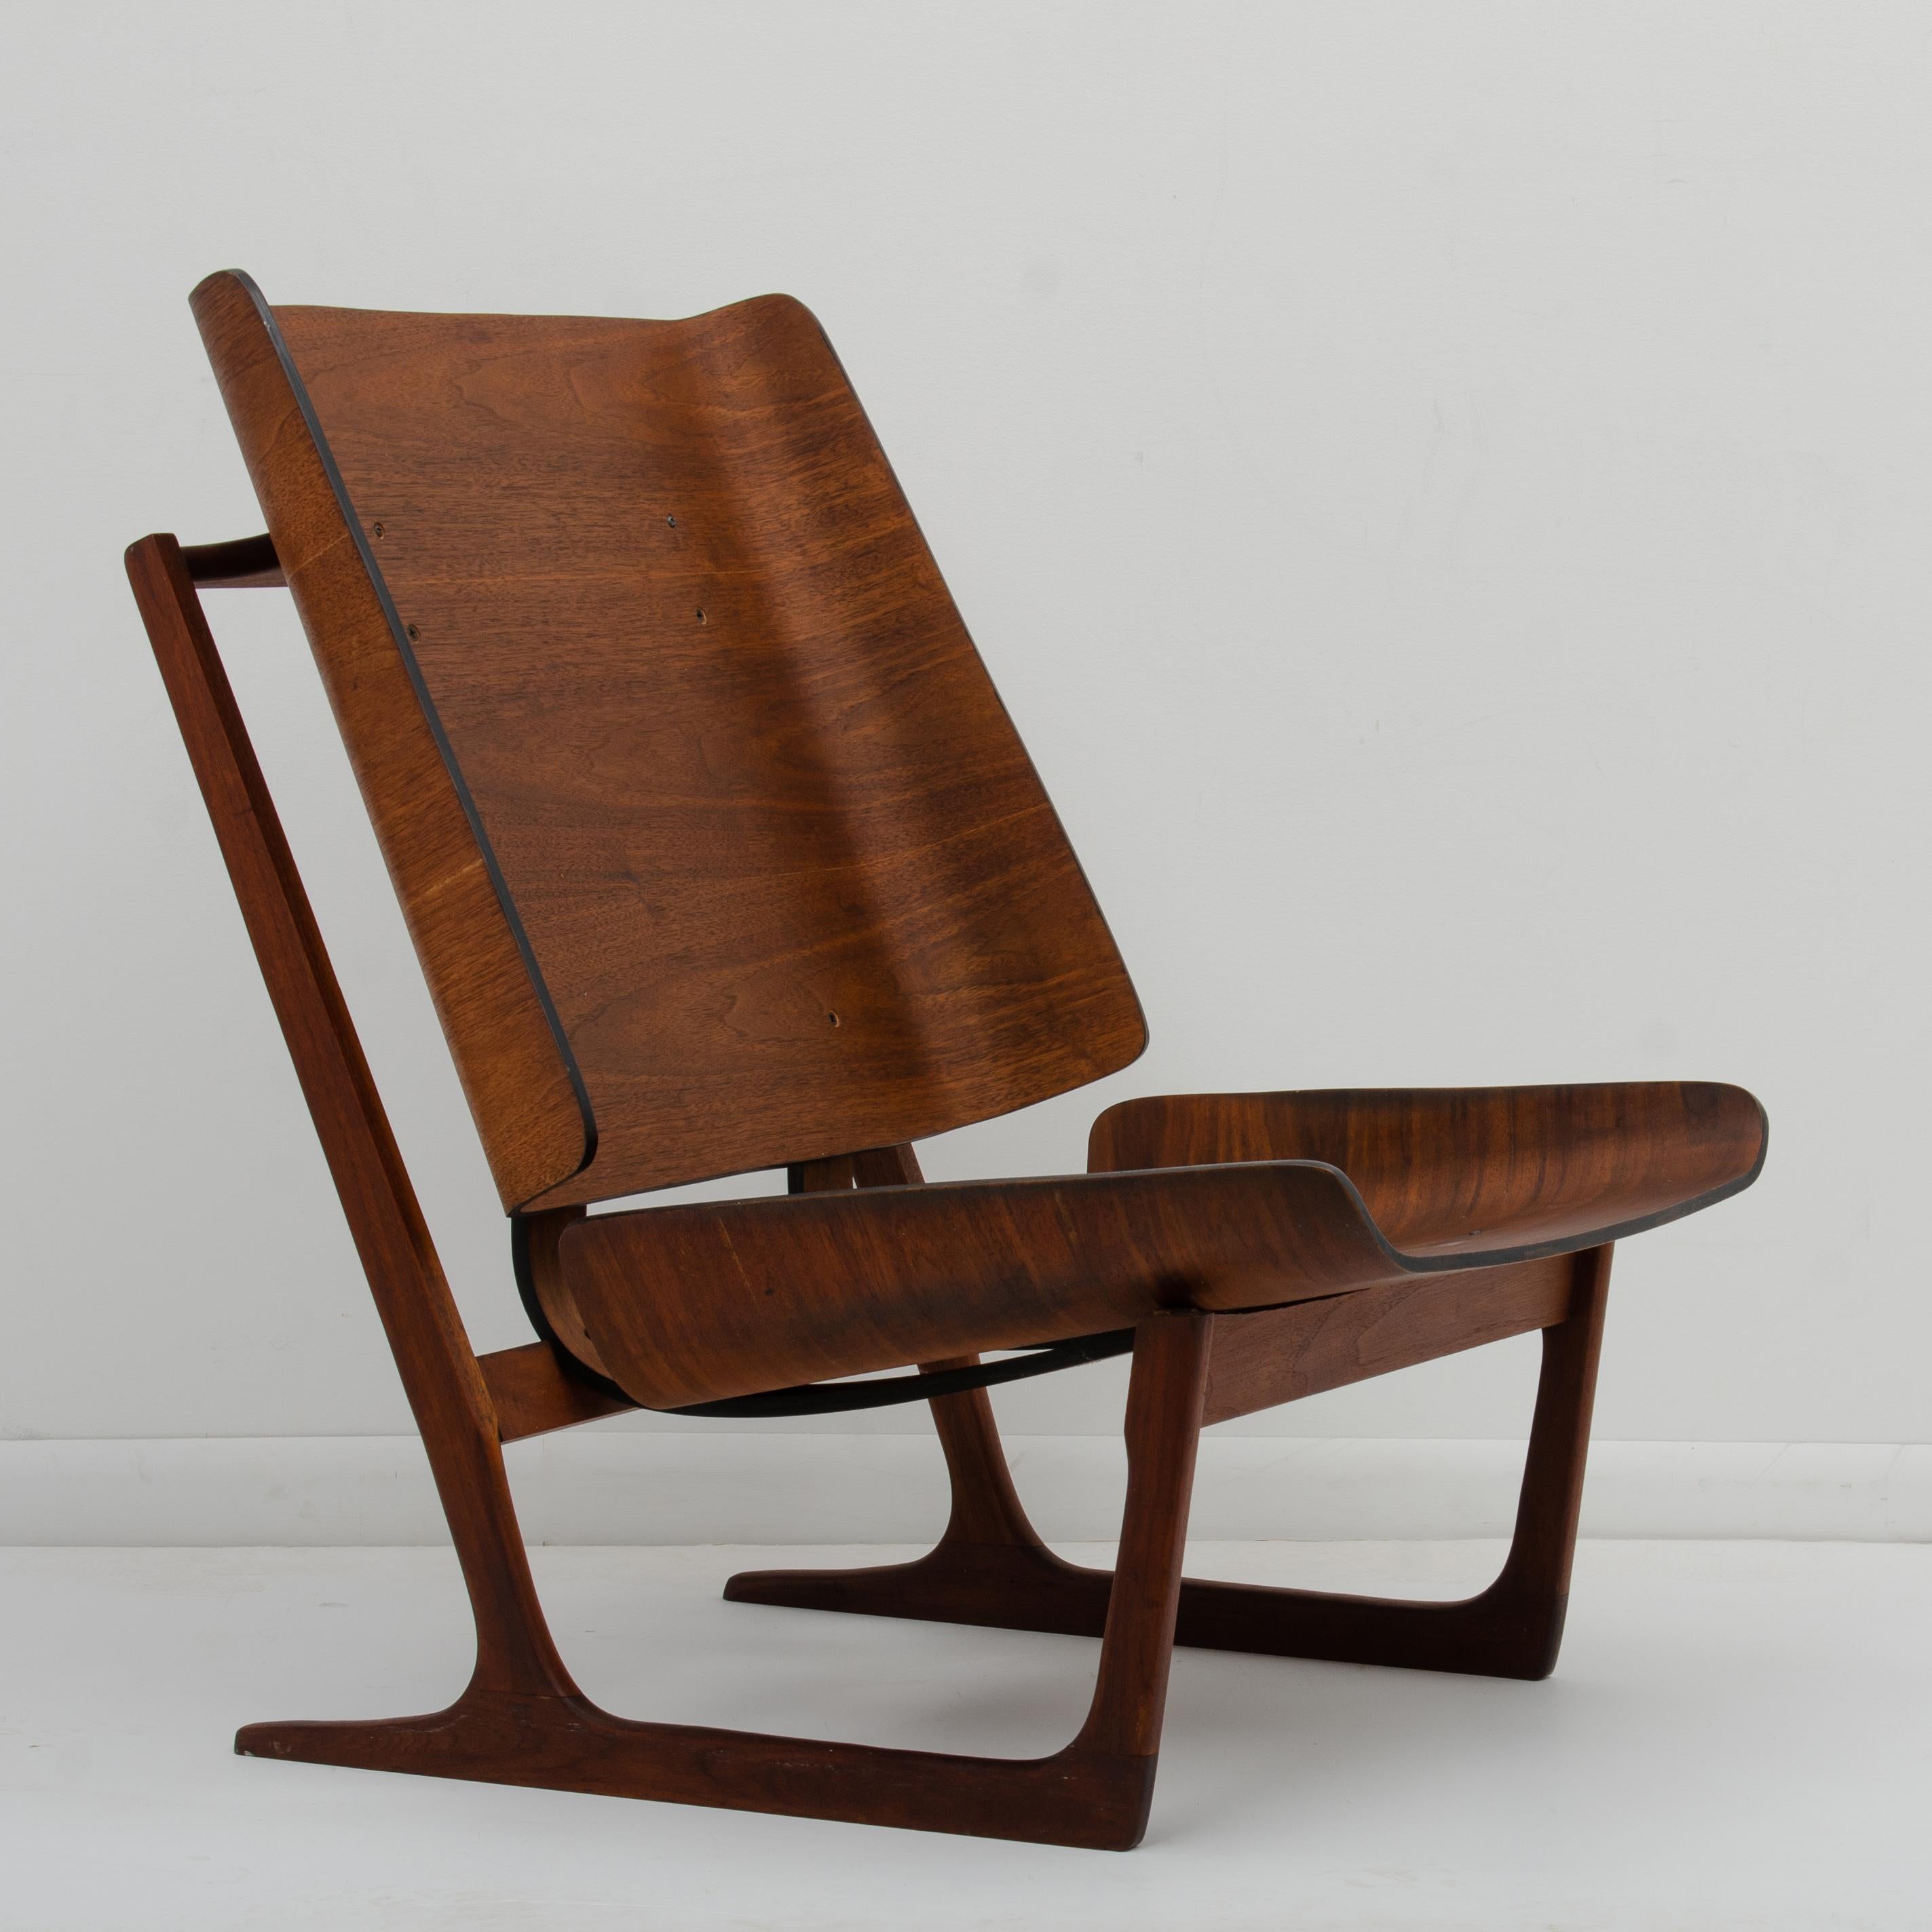 A Mid-Century Modern walnut lounge chair designed by Hans Juergens for Deco House. Often misattributed as teak, designed by Grete Jalk and made in Denmark. This chair is well made, looks great at all angles and was designed with attention to detail.